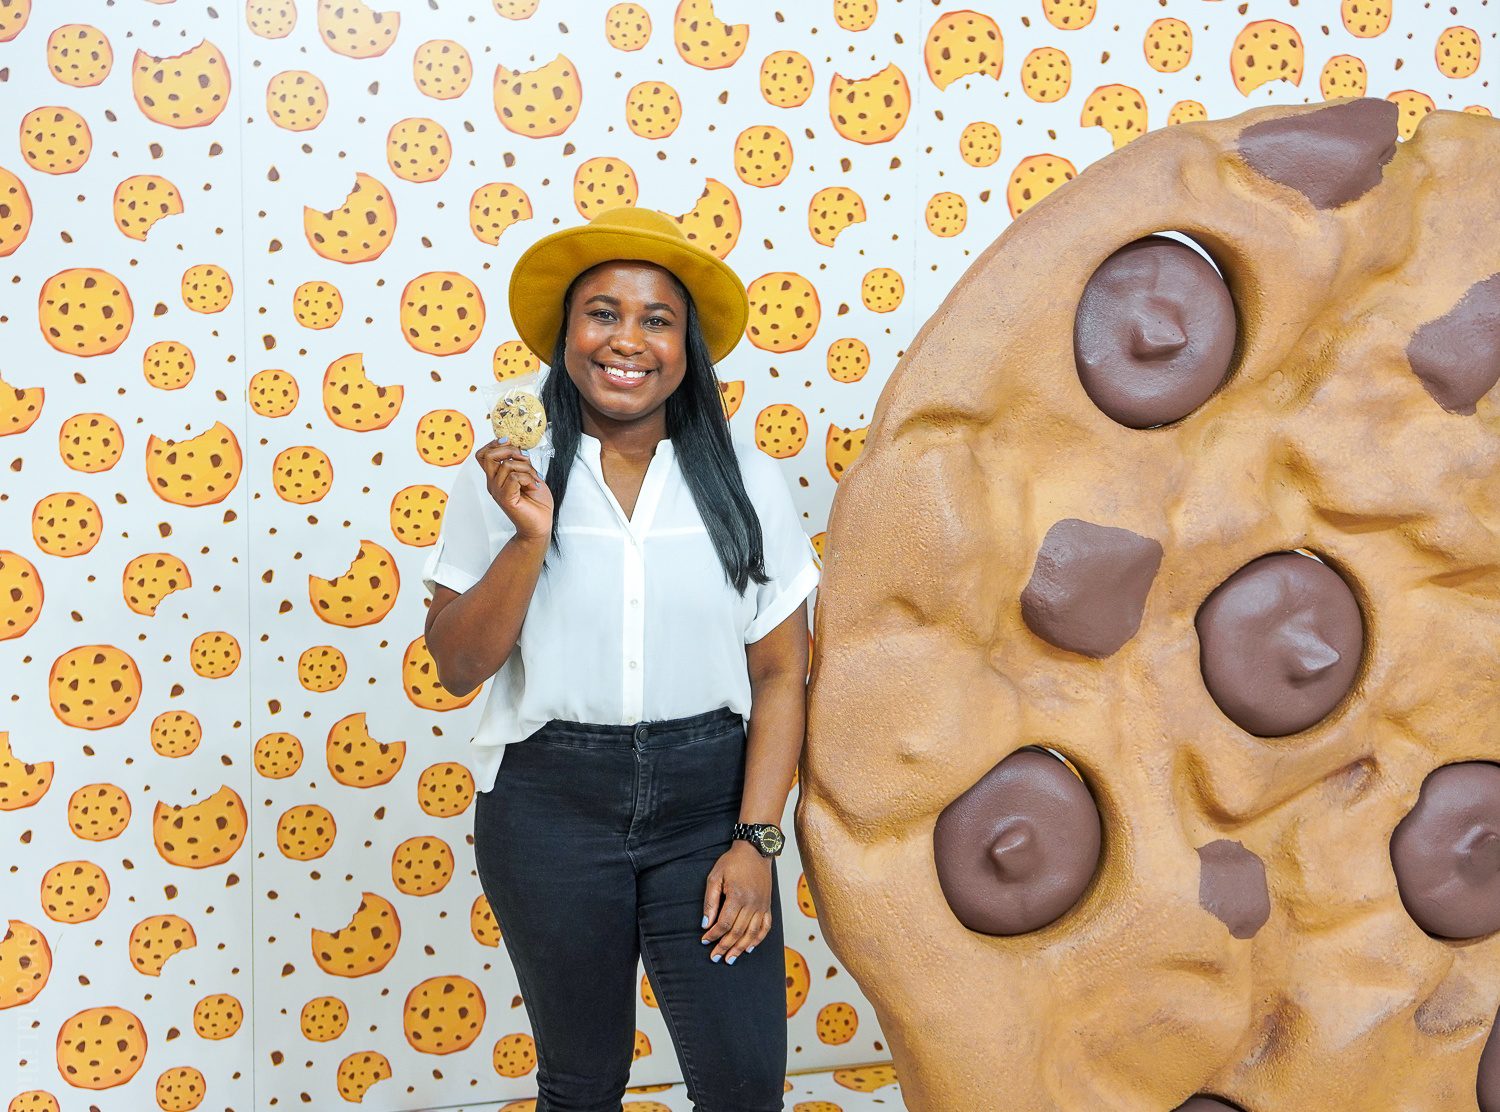 Cookie Room with wallpaper and life sized chocolate chip at Happy Place influencer tour